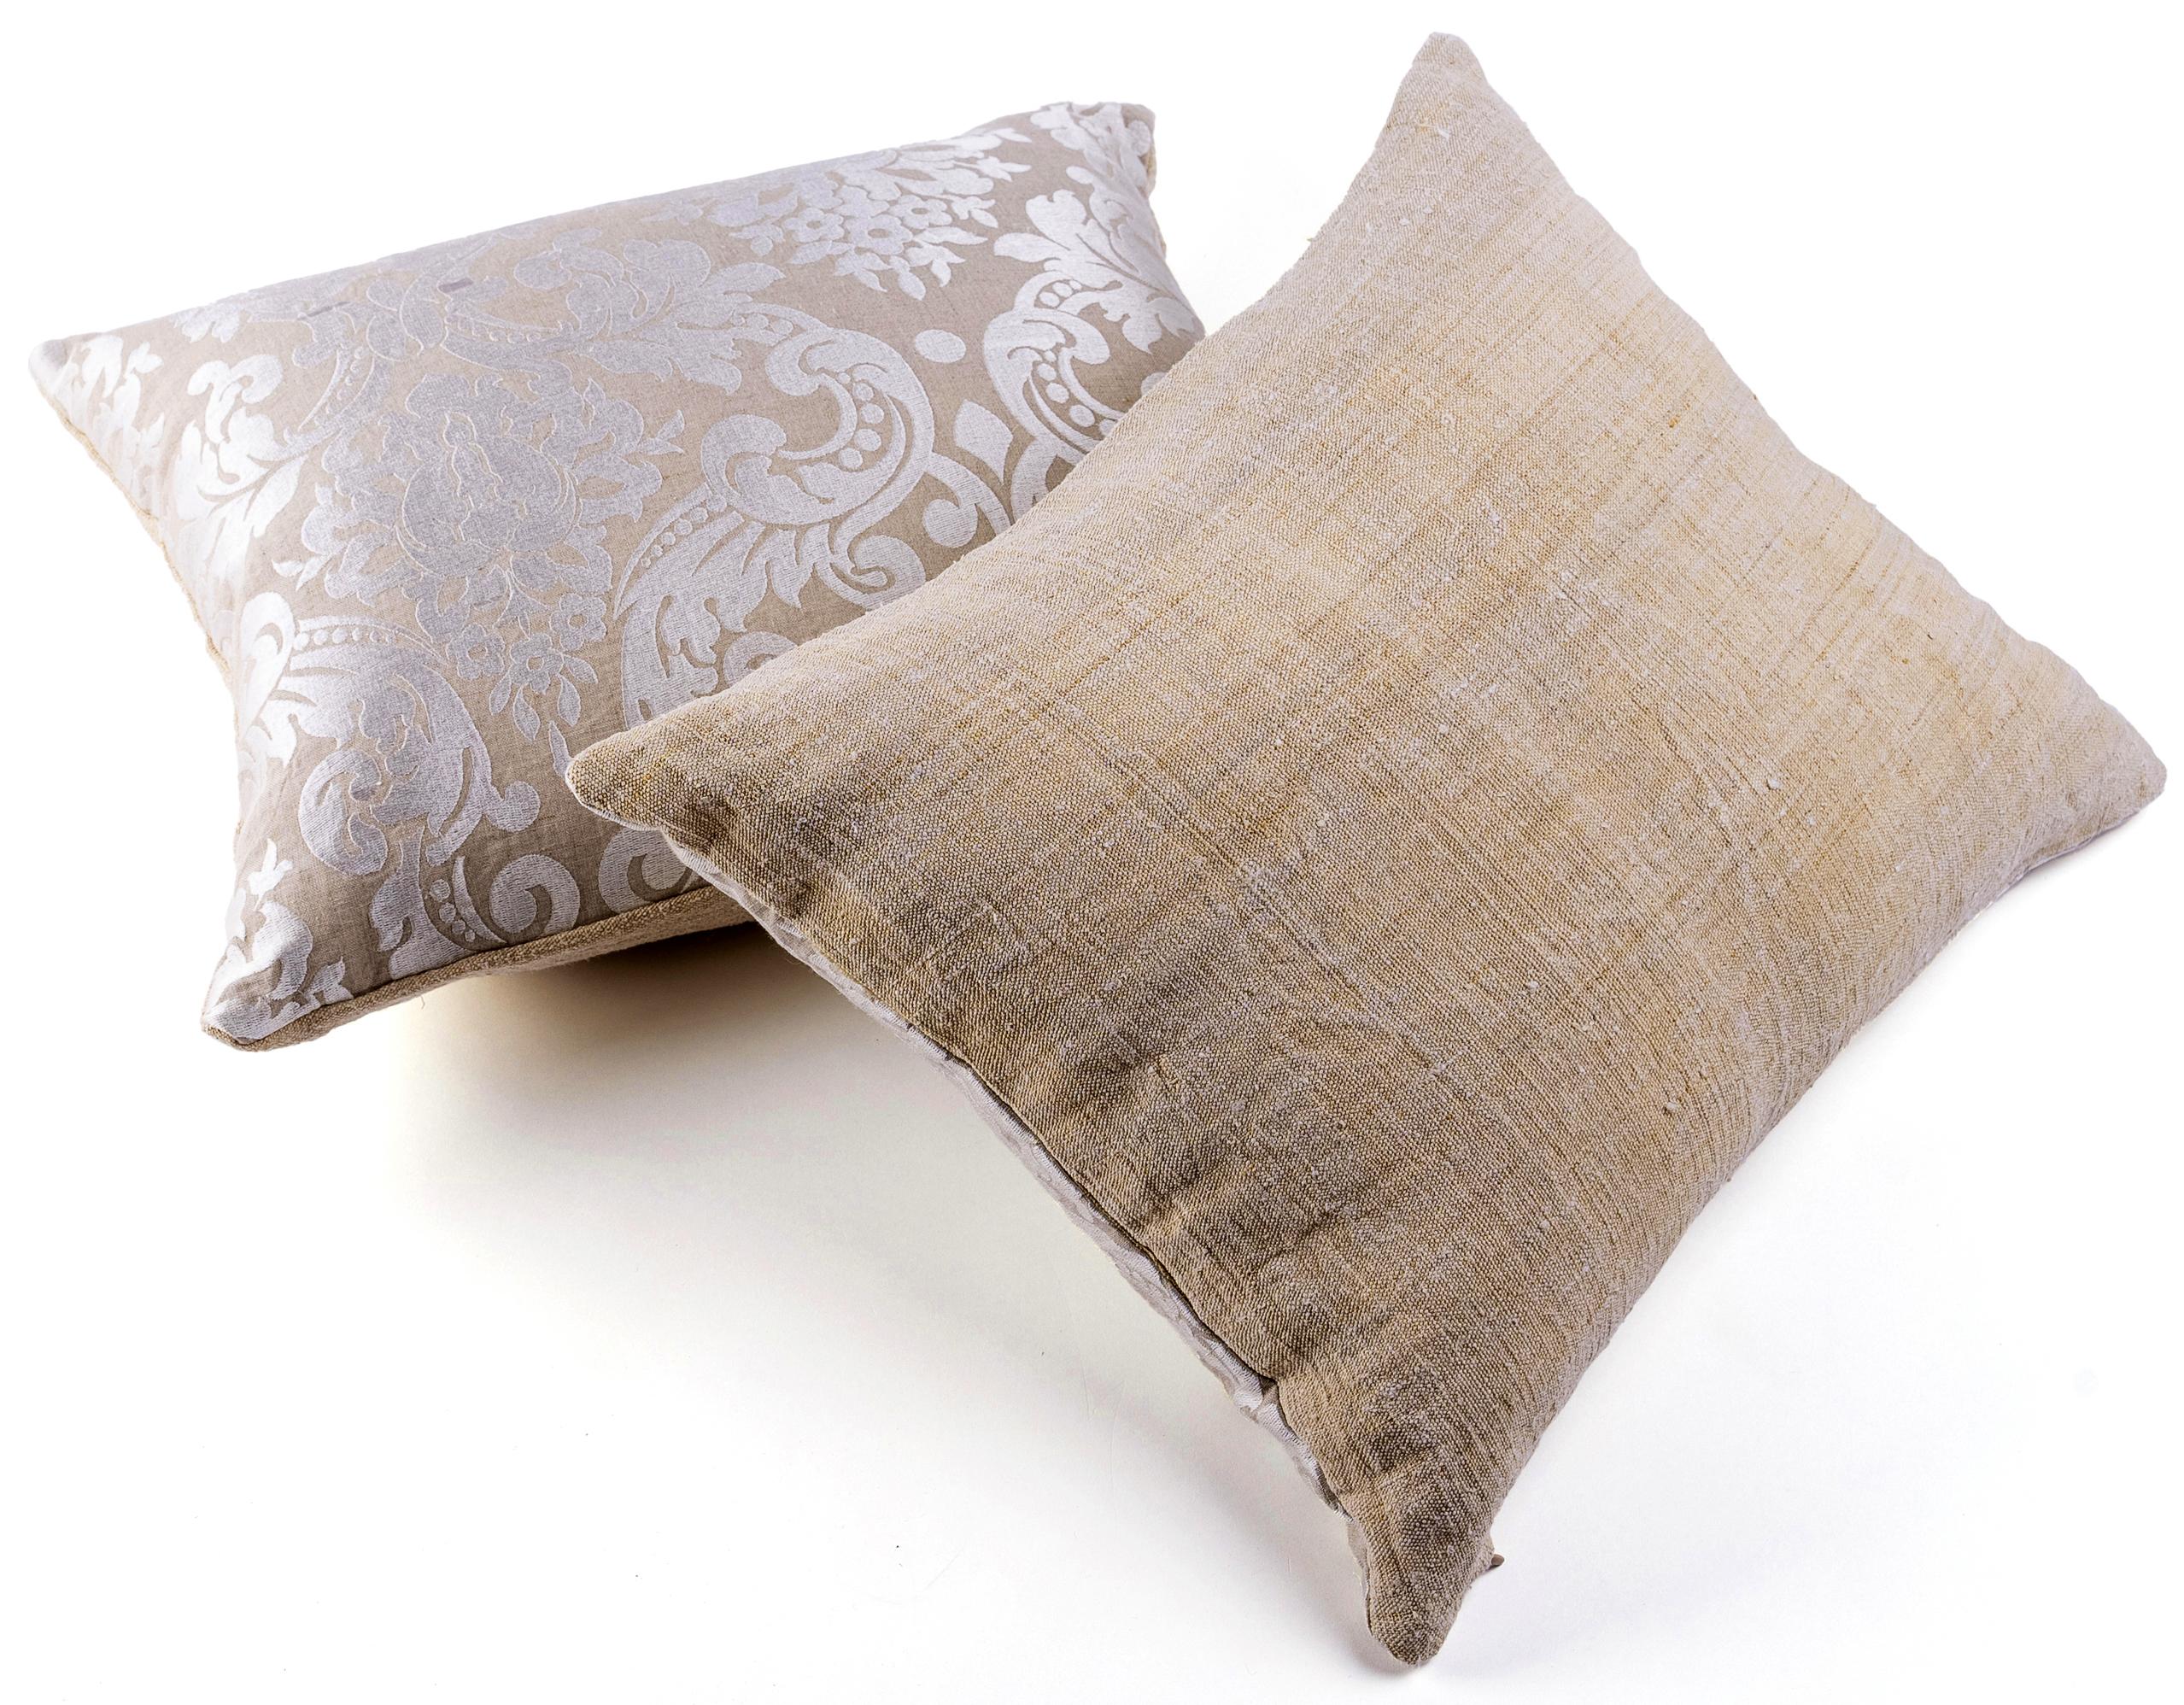 This pair of cushions are made from pieces recovered from an antique, rustic, heavy hemp fabric sheet (19th century France) on one side. This fabric is hand spun and hand-woven. The other side is made of a contemporary sand beige linen, machine